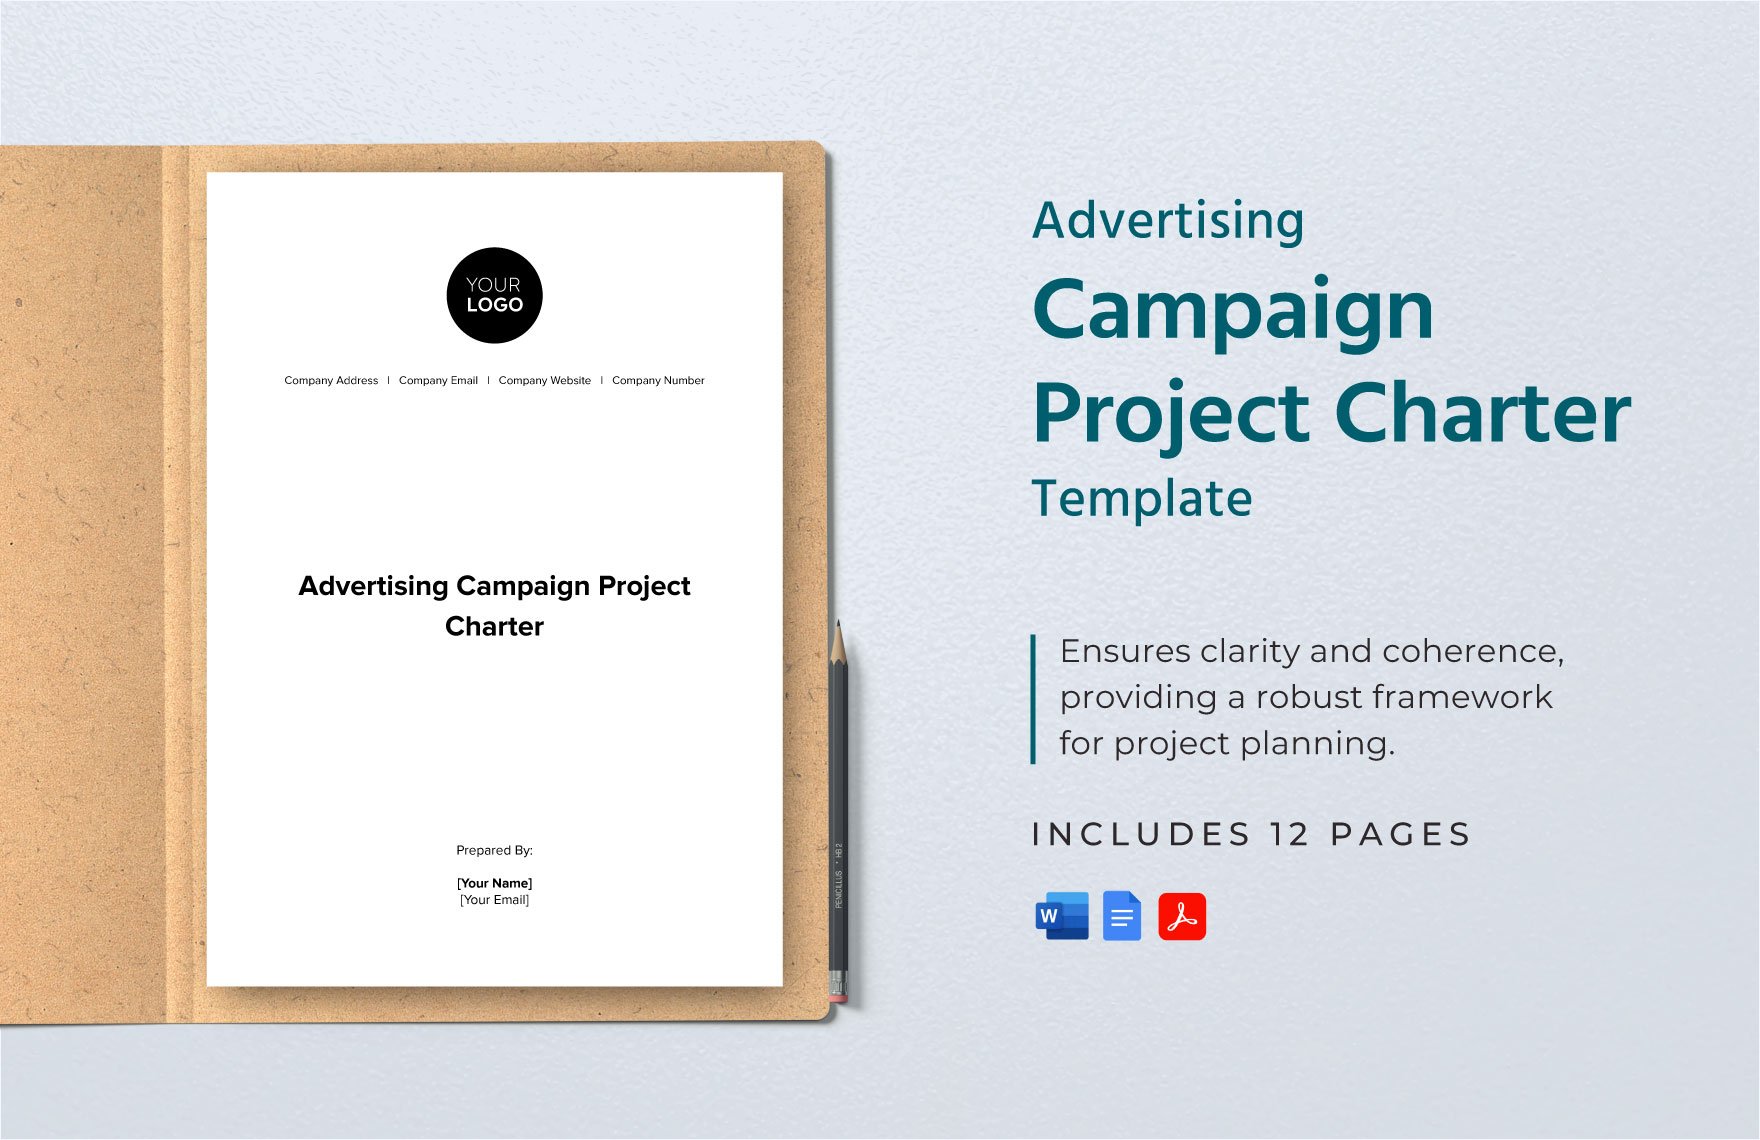 Advertising Campaign Project Charter Template